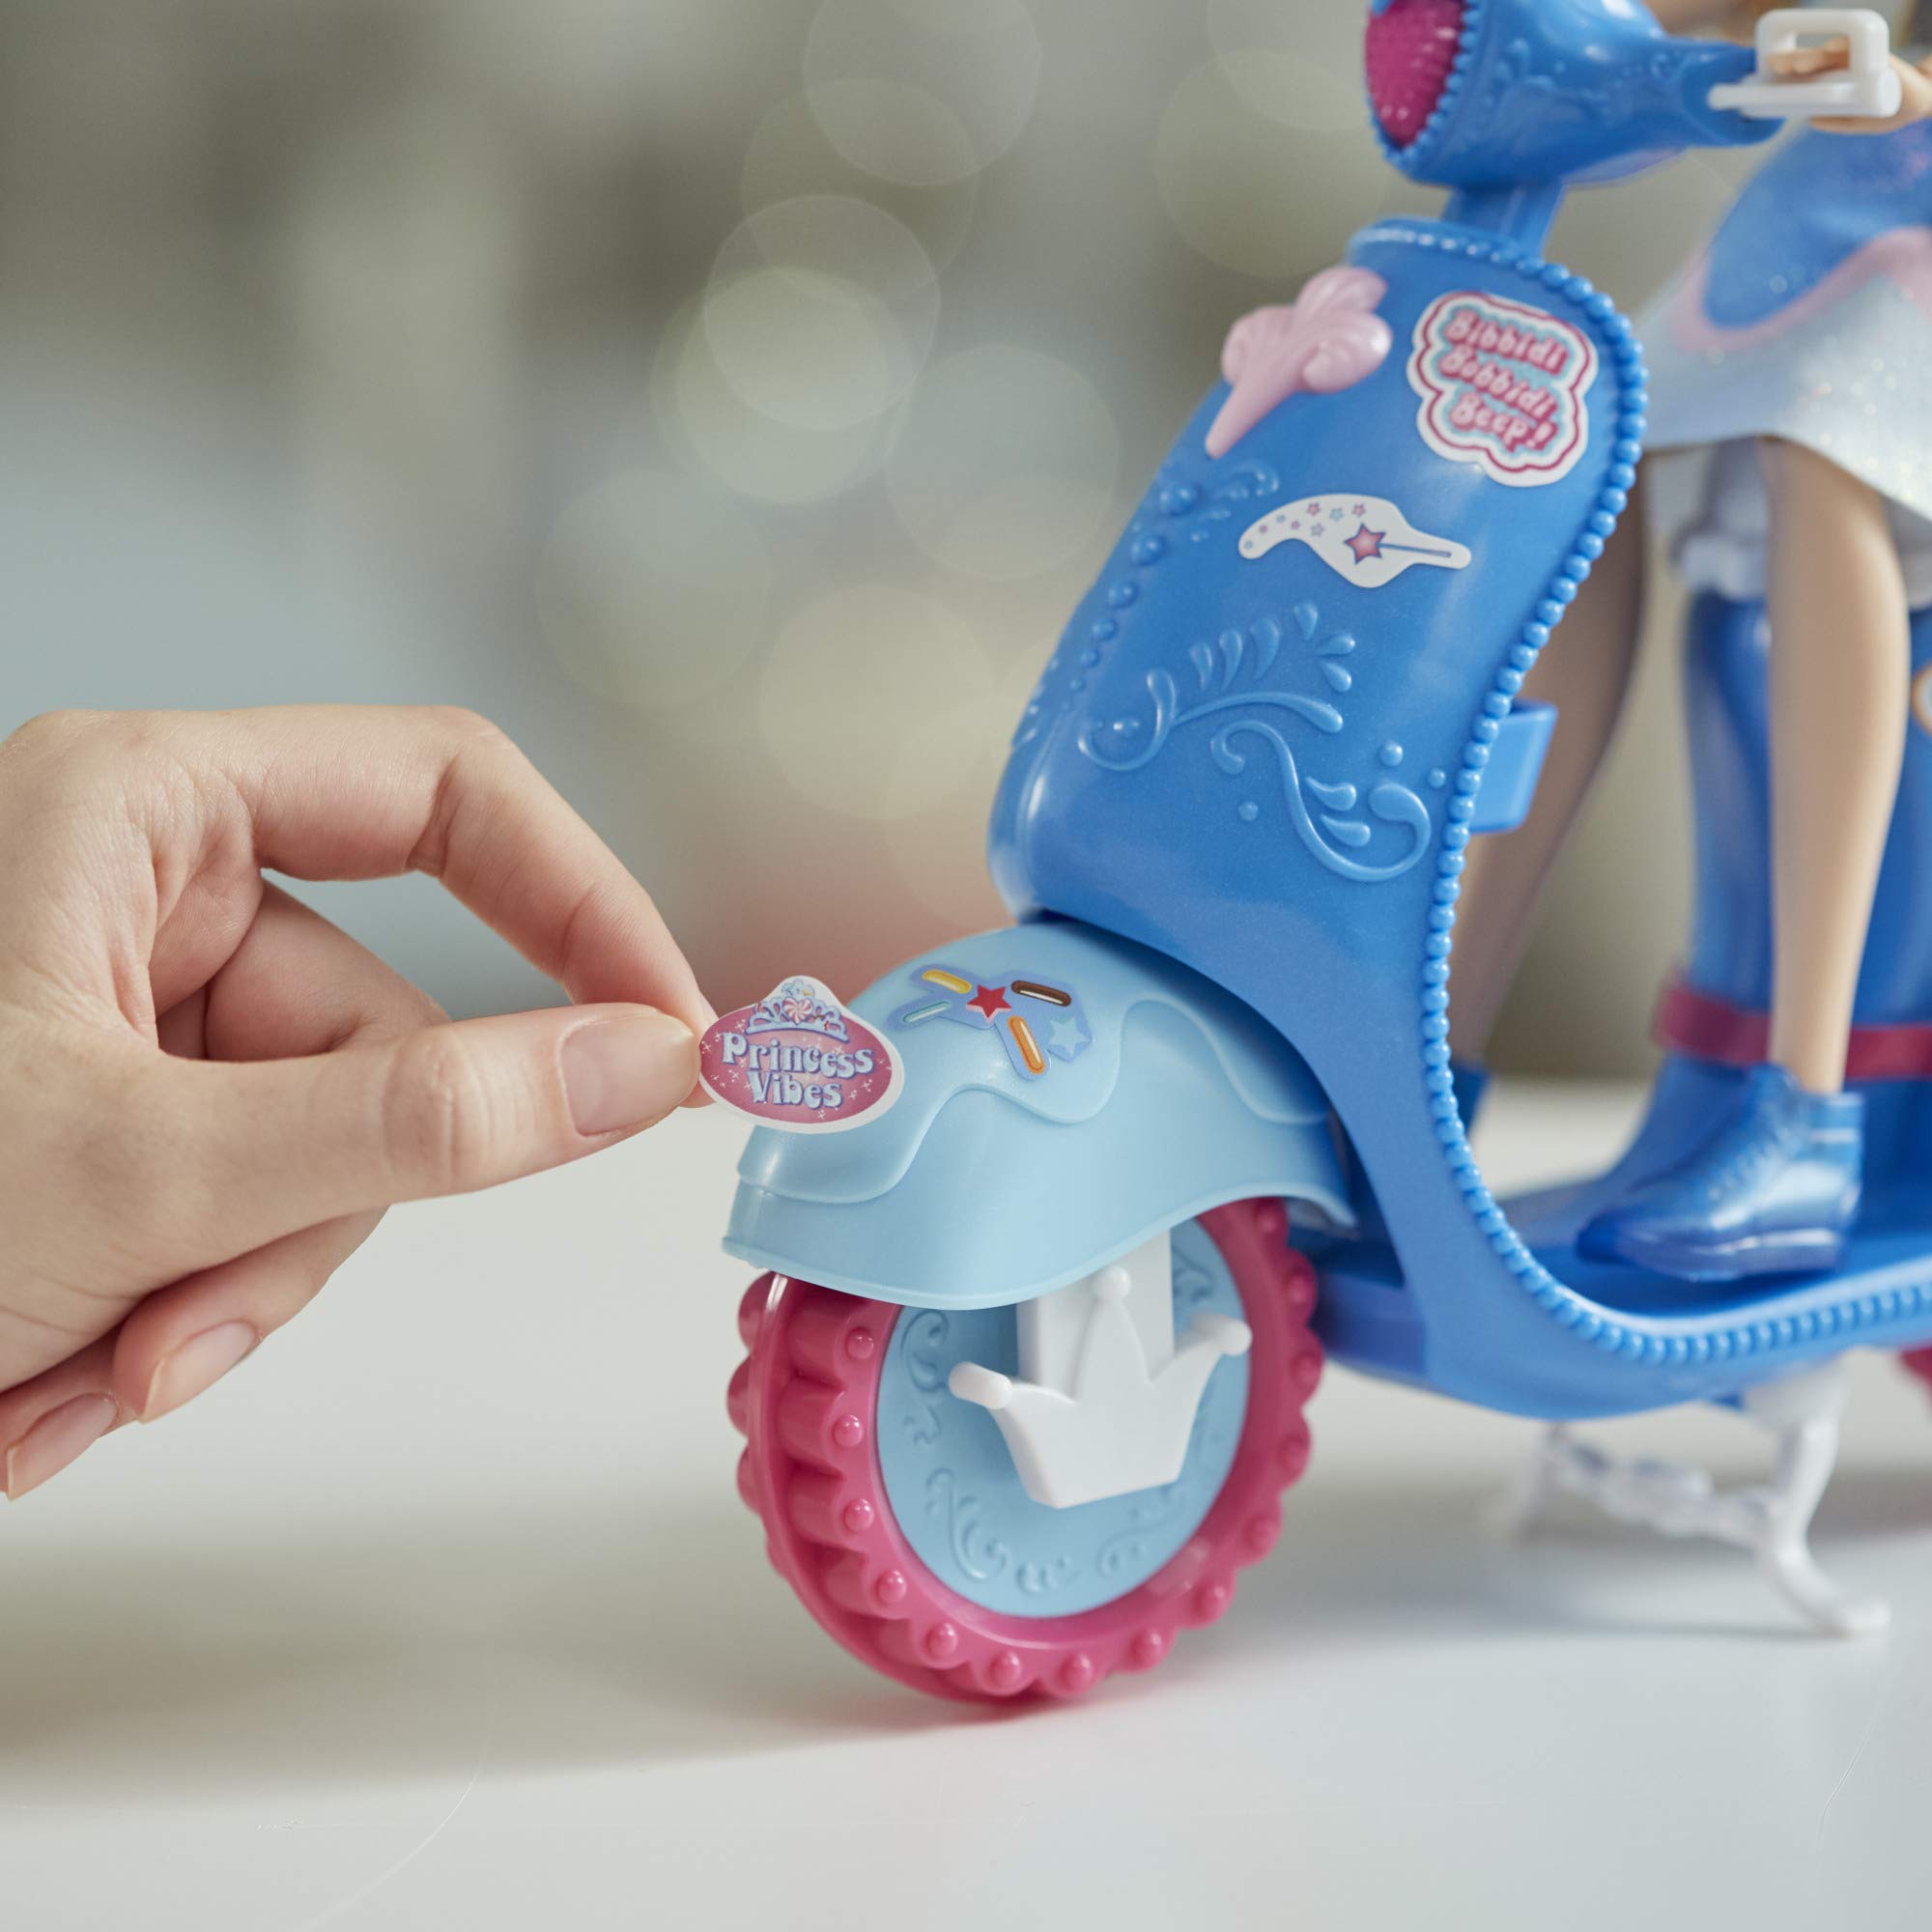 Disney Princess Comfy Squad Cinderella's Sweet Scooter, Fashion Doll with Scooter, Helmet, and Stickers, Toy for Girls 5 Years and Up